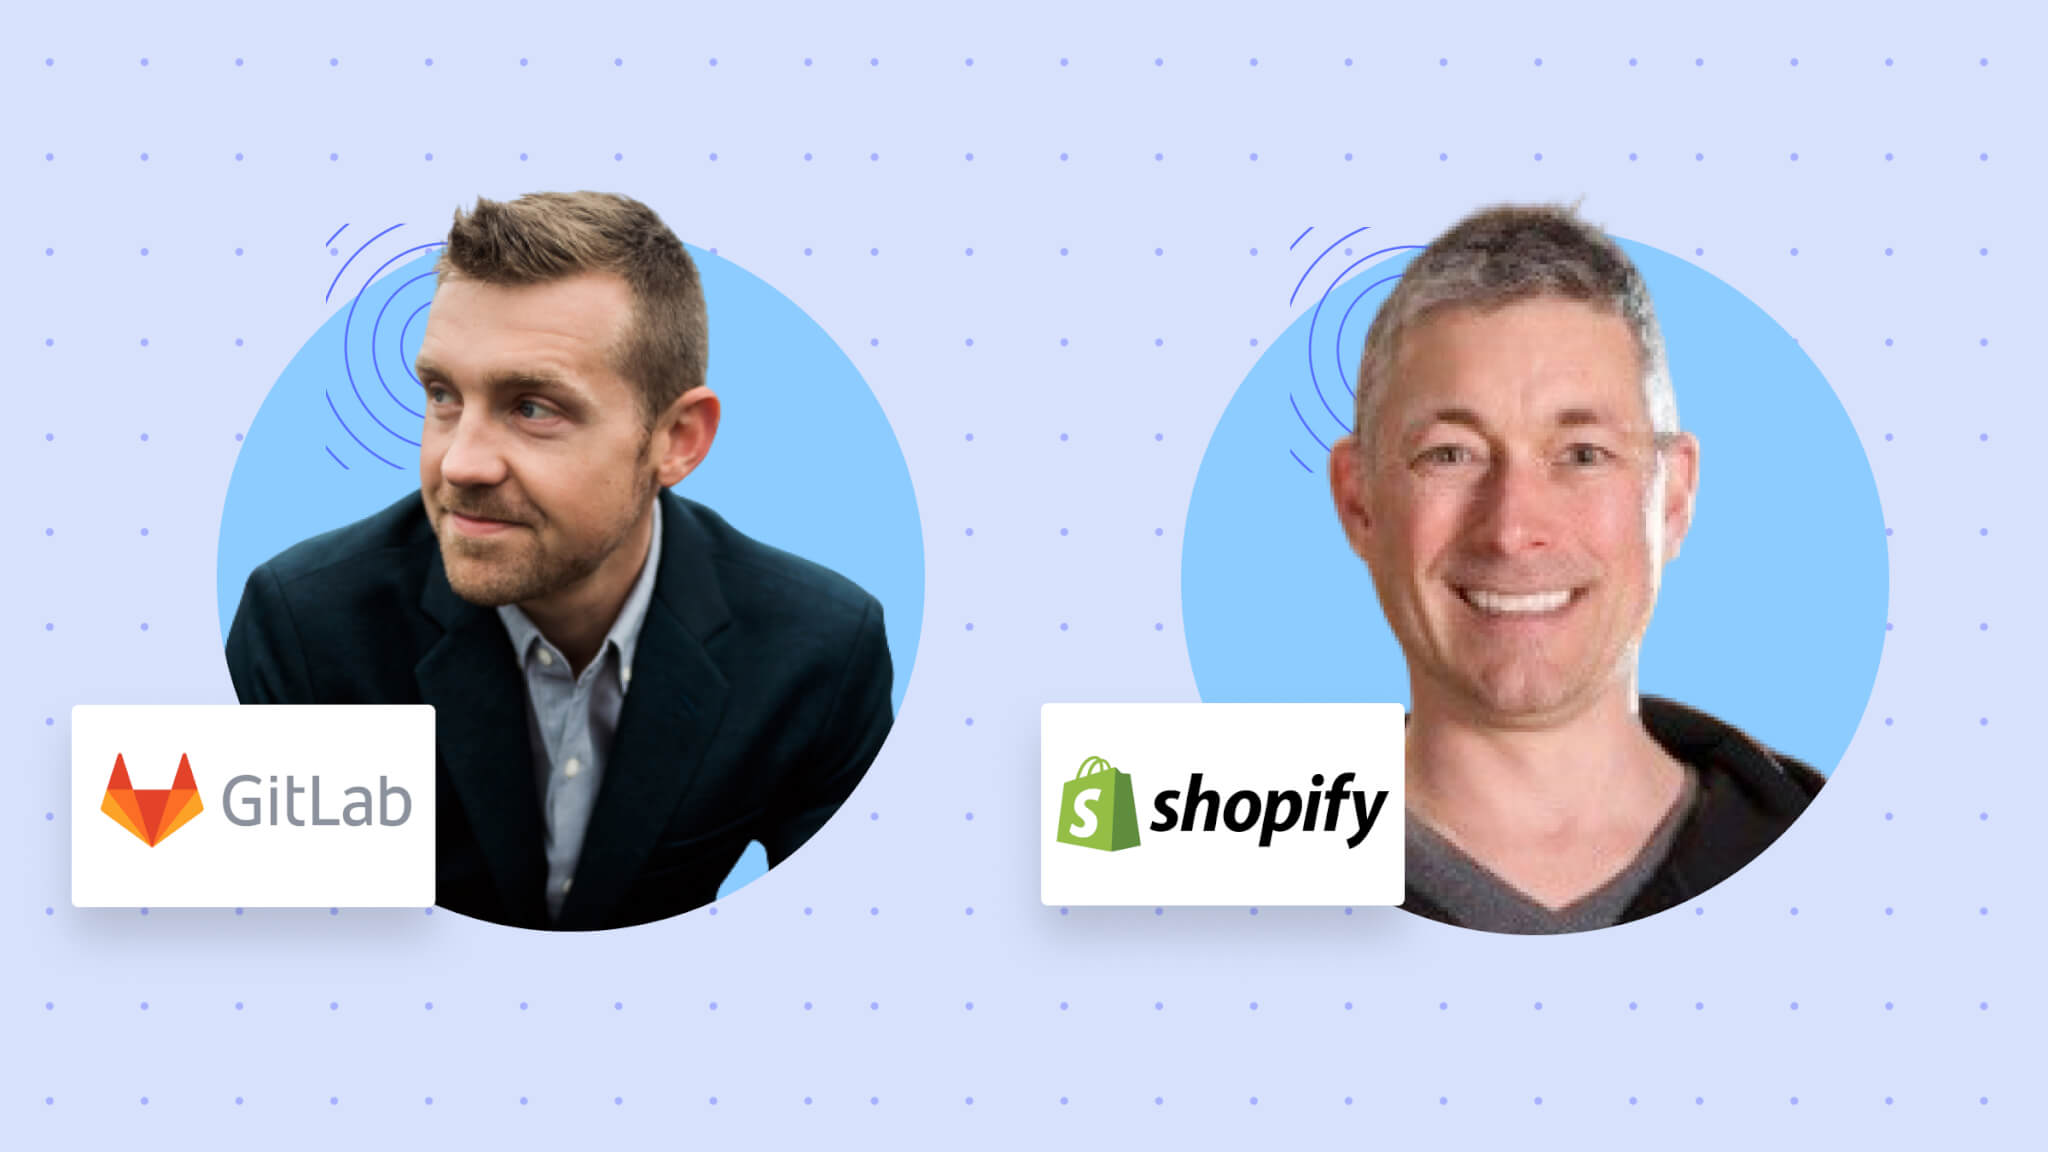 Work from Anywhere: Shopify and GitLab on a Digital By Default Future